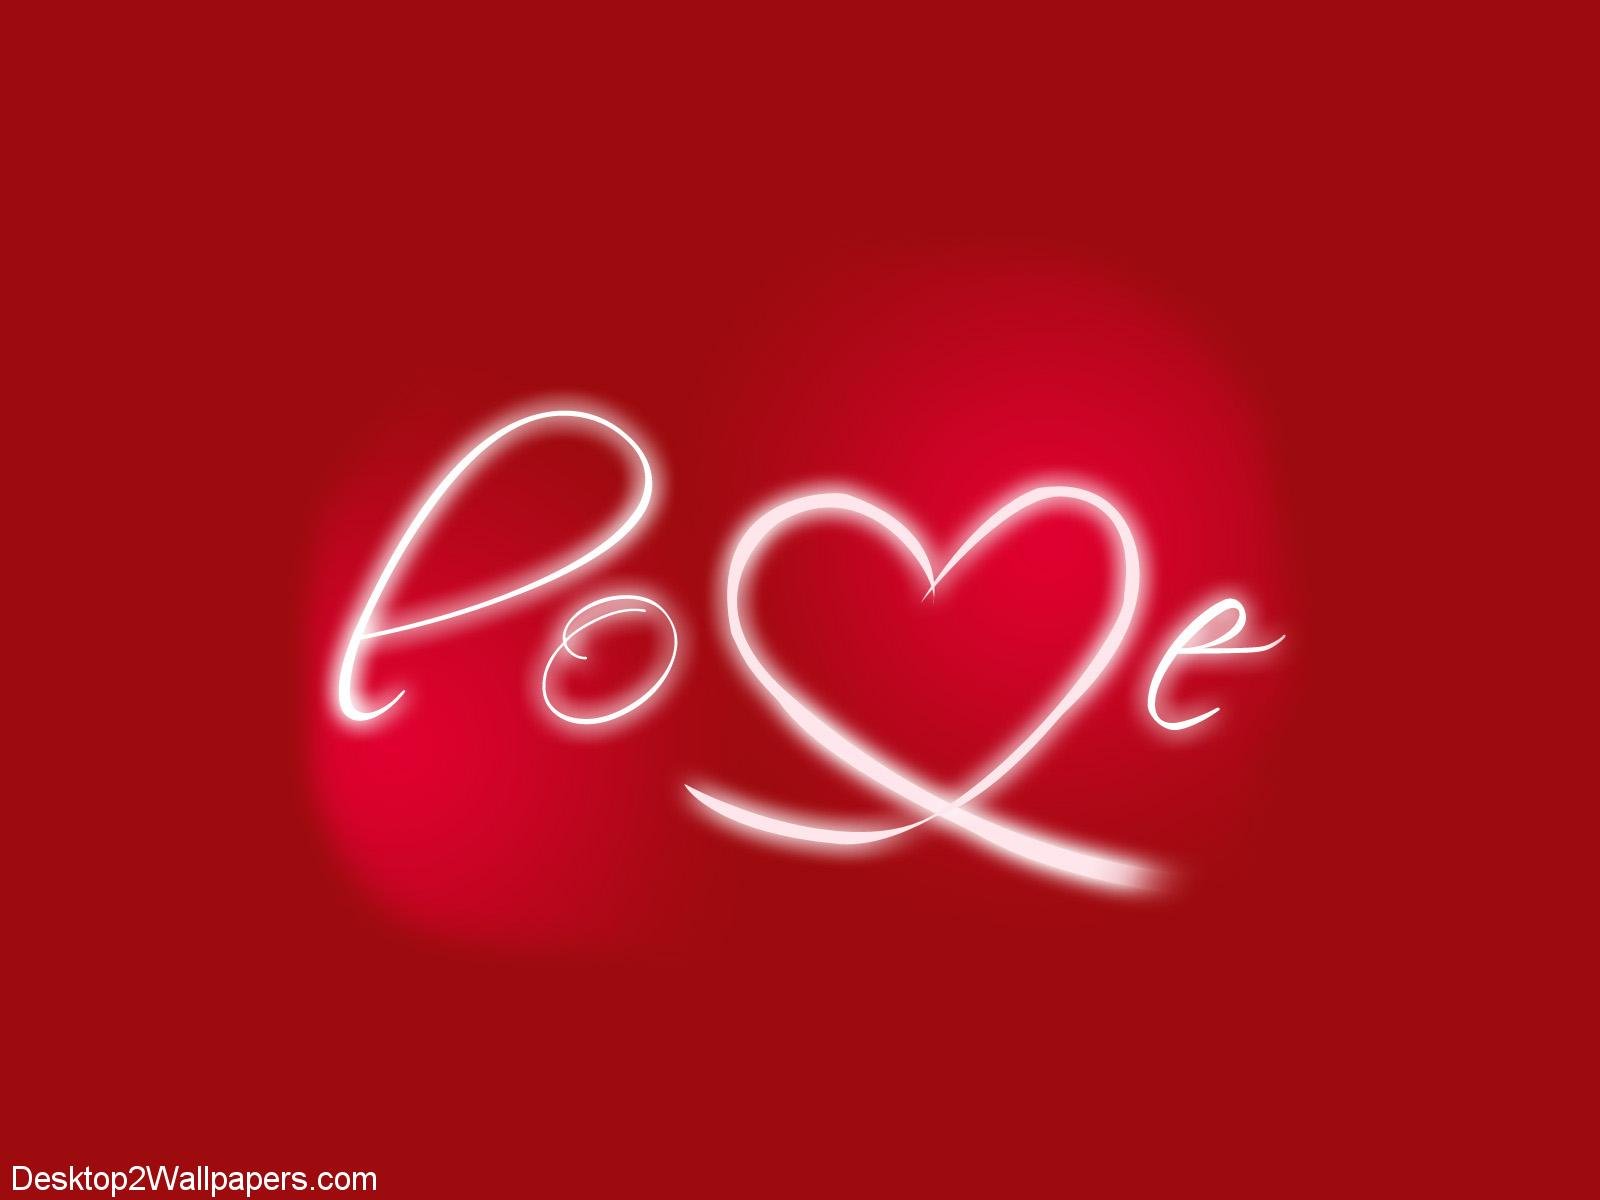 Red Heart Wallpaper 10282 Hd Wallpapers in Love   Imagescicom 1600x1200